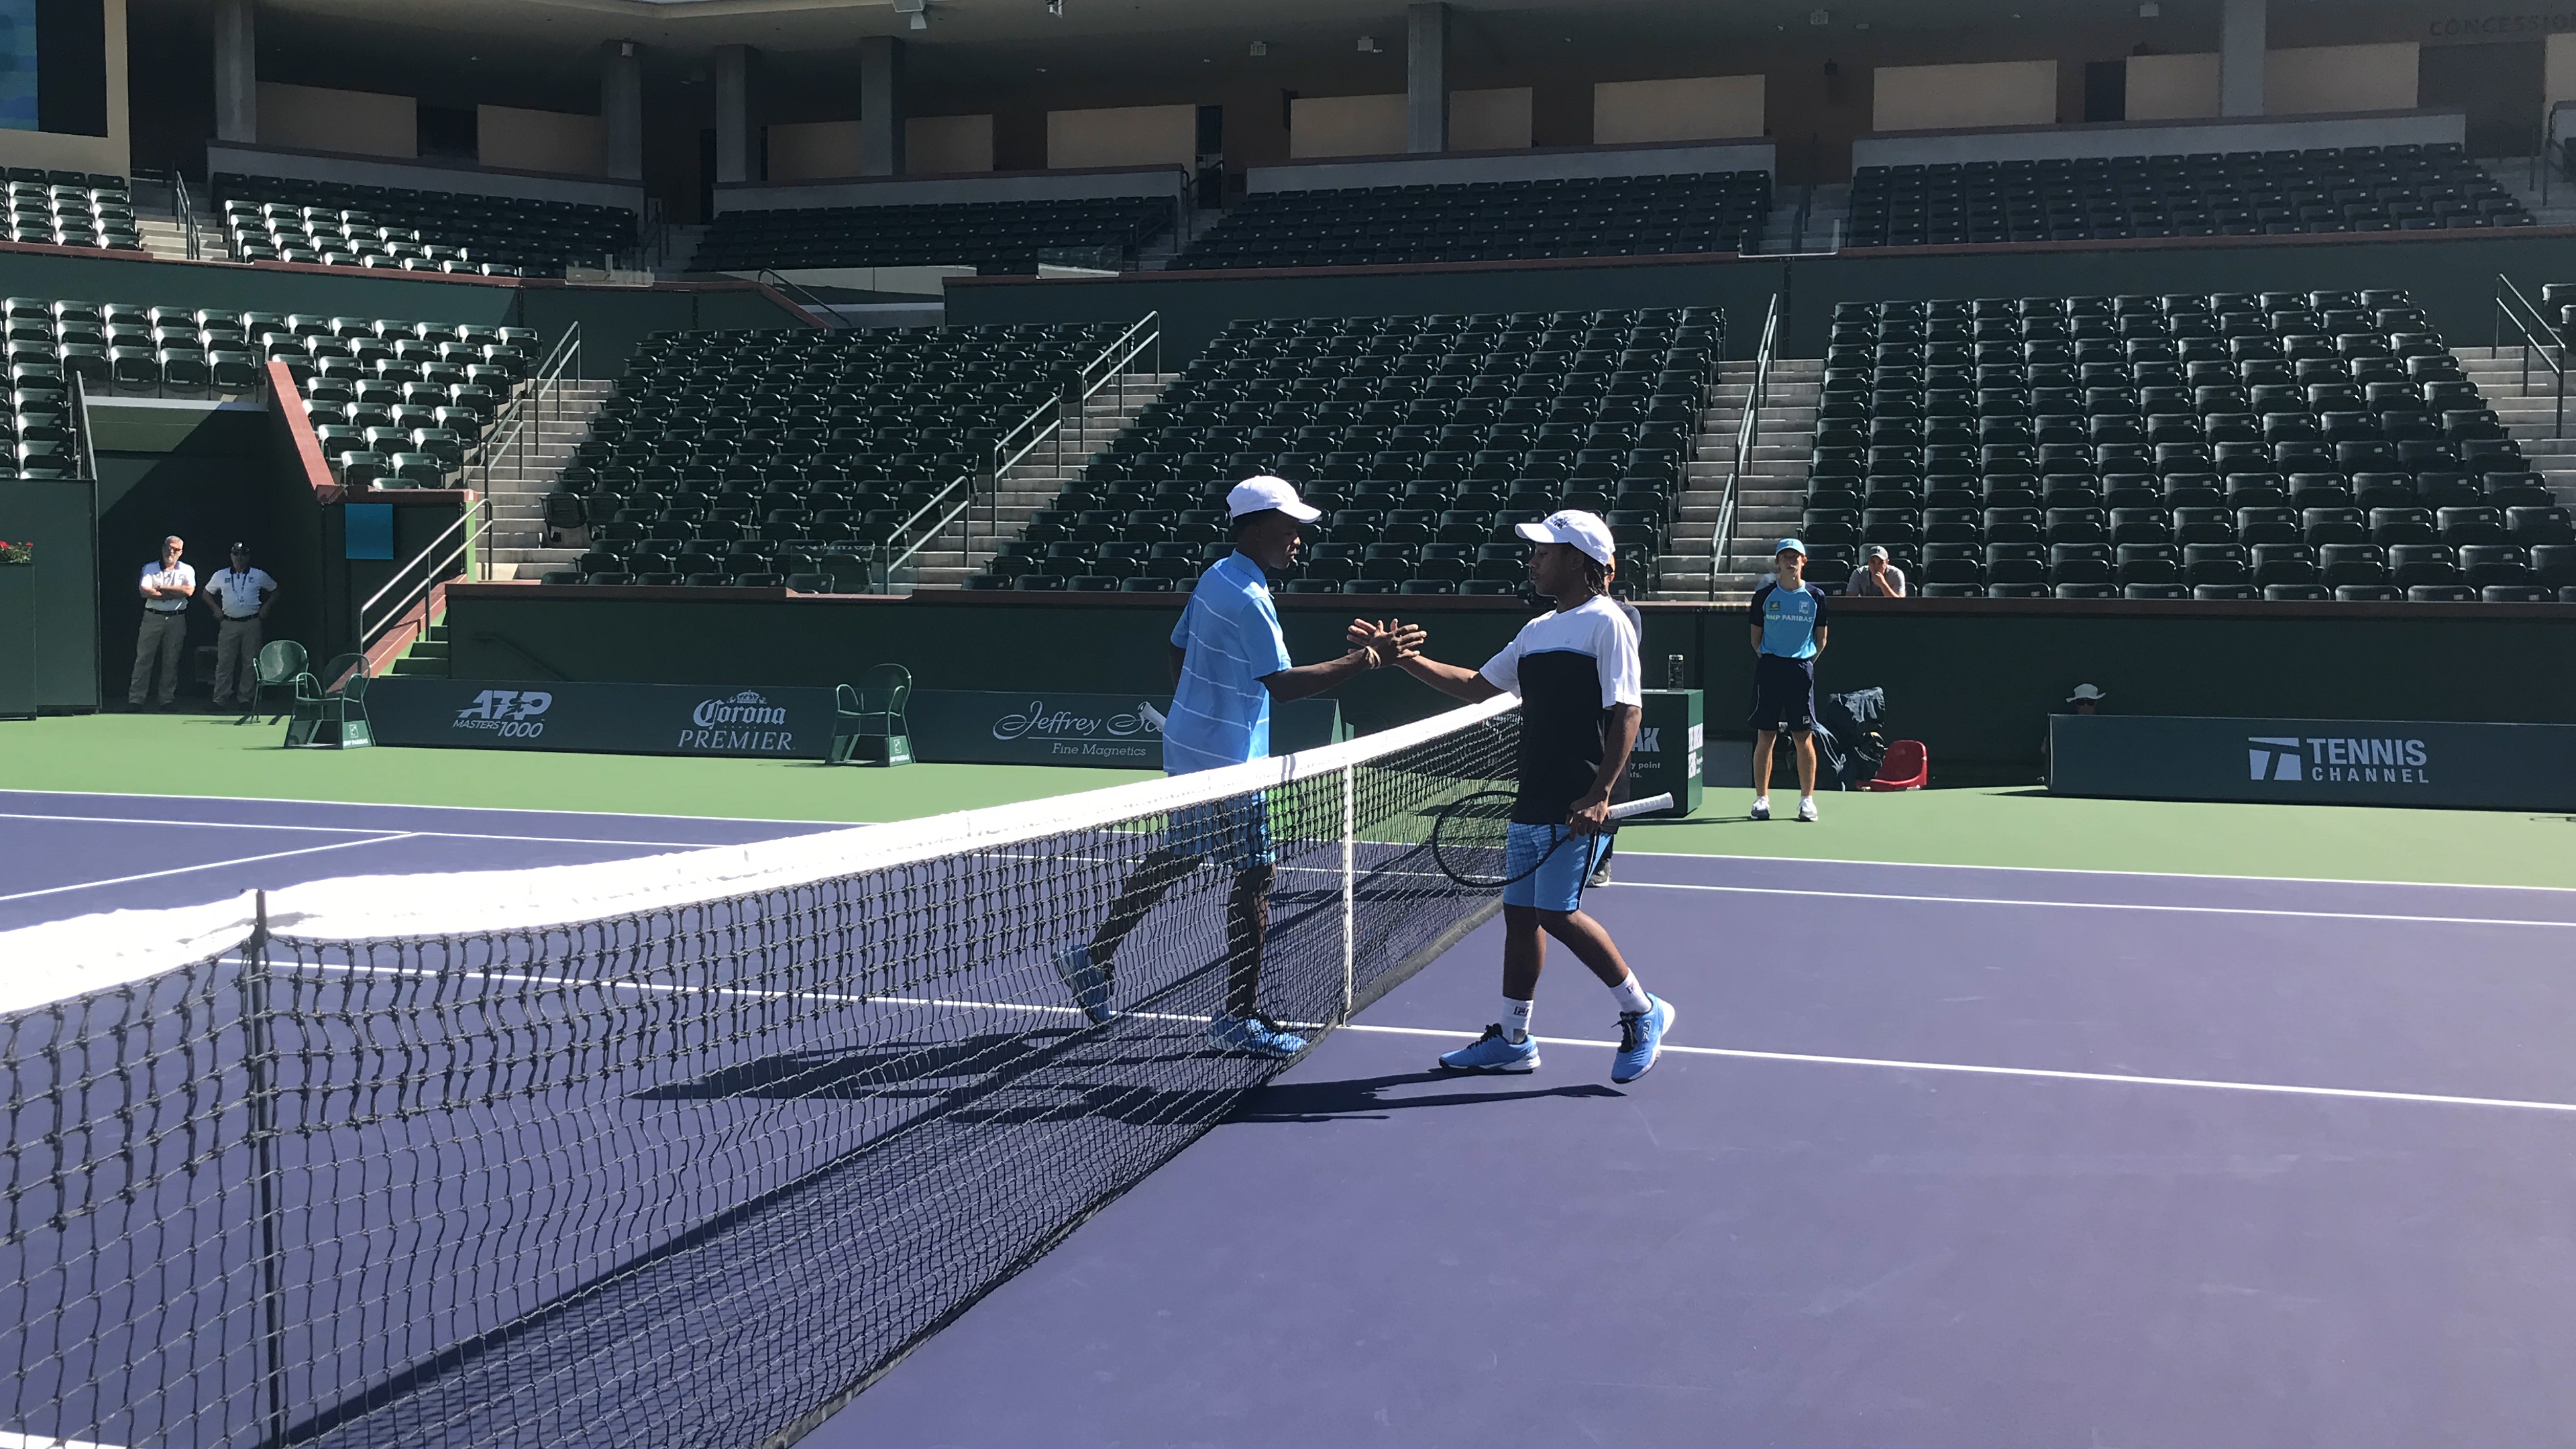 NYJTL Players Compete in the Tie Break Tens Challenger USA at the BNP Paribas Open